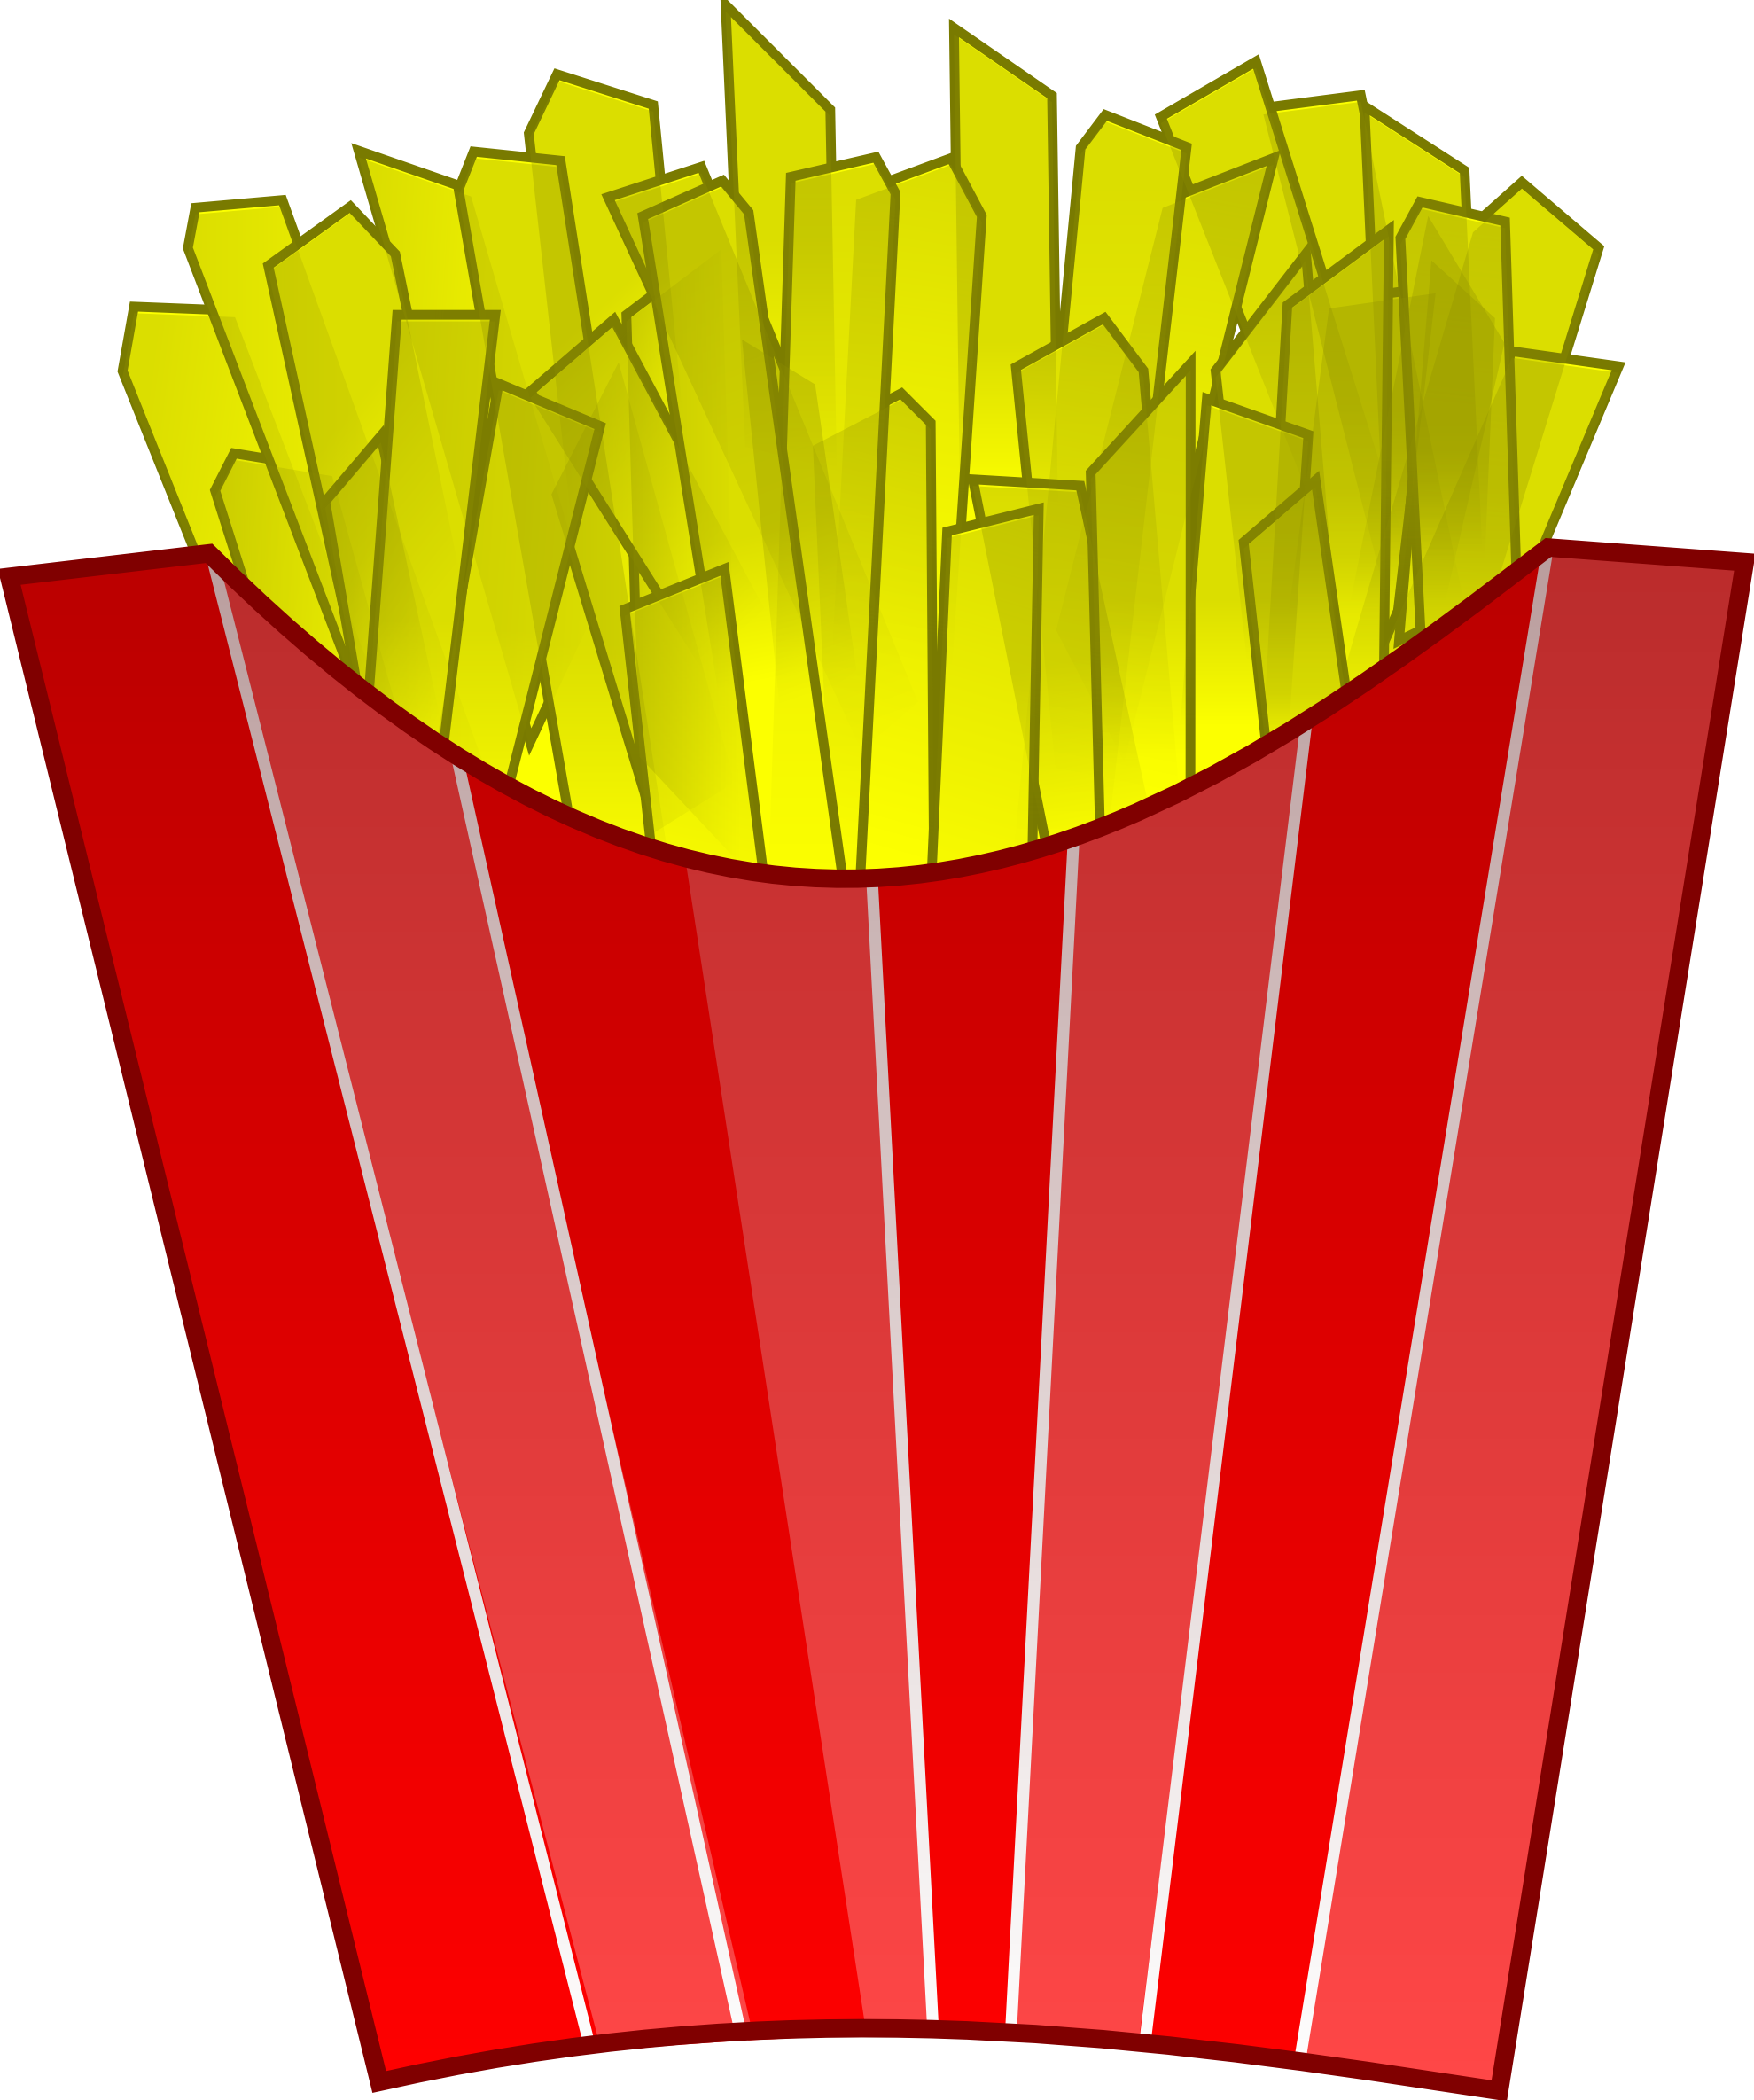 French Fries Coloring Book Colouring Letters colouringbook.org ...